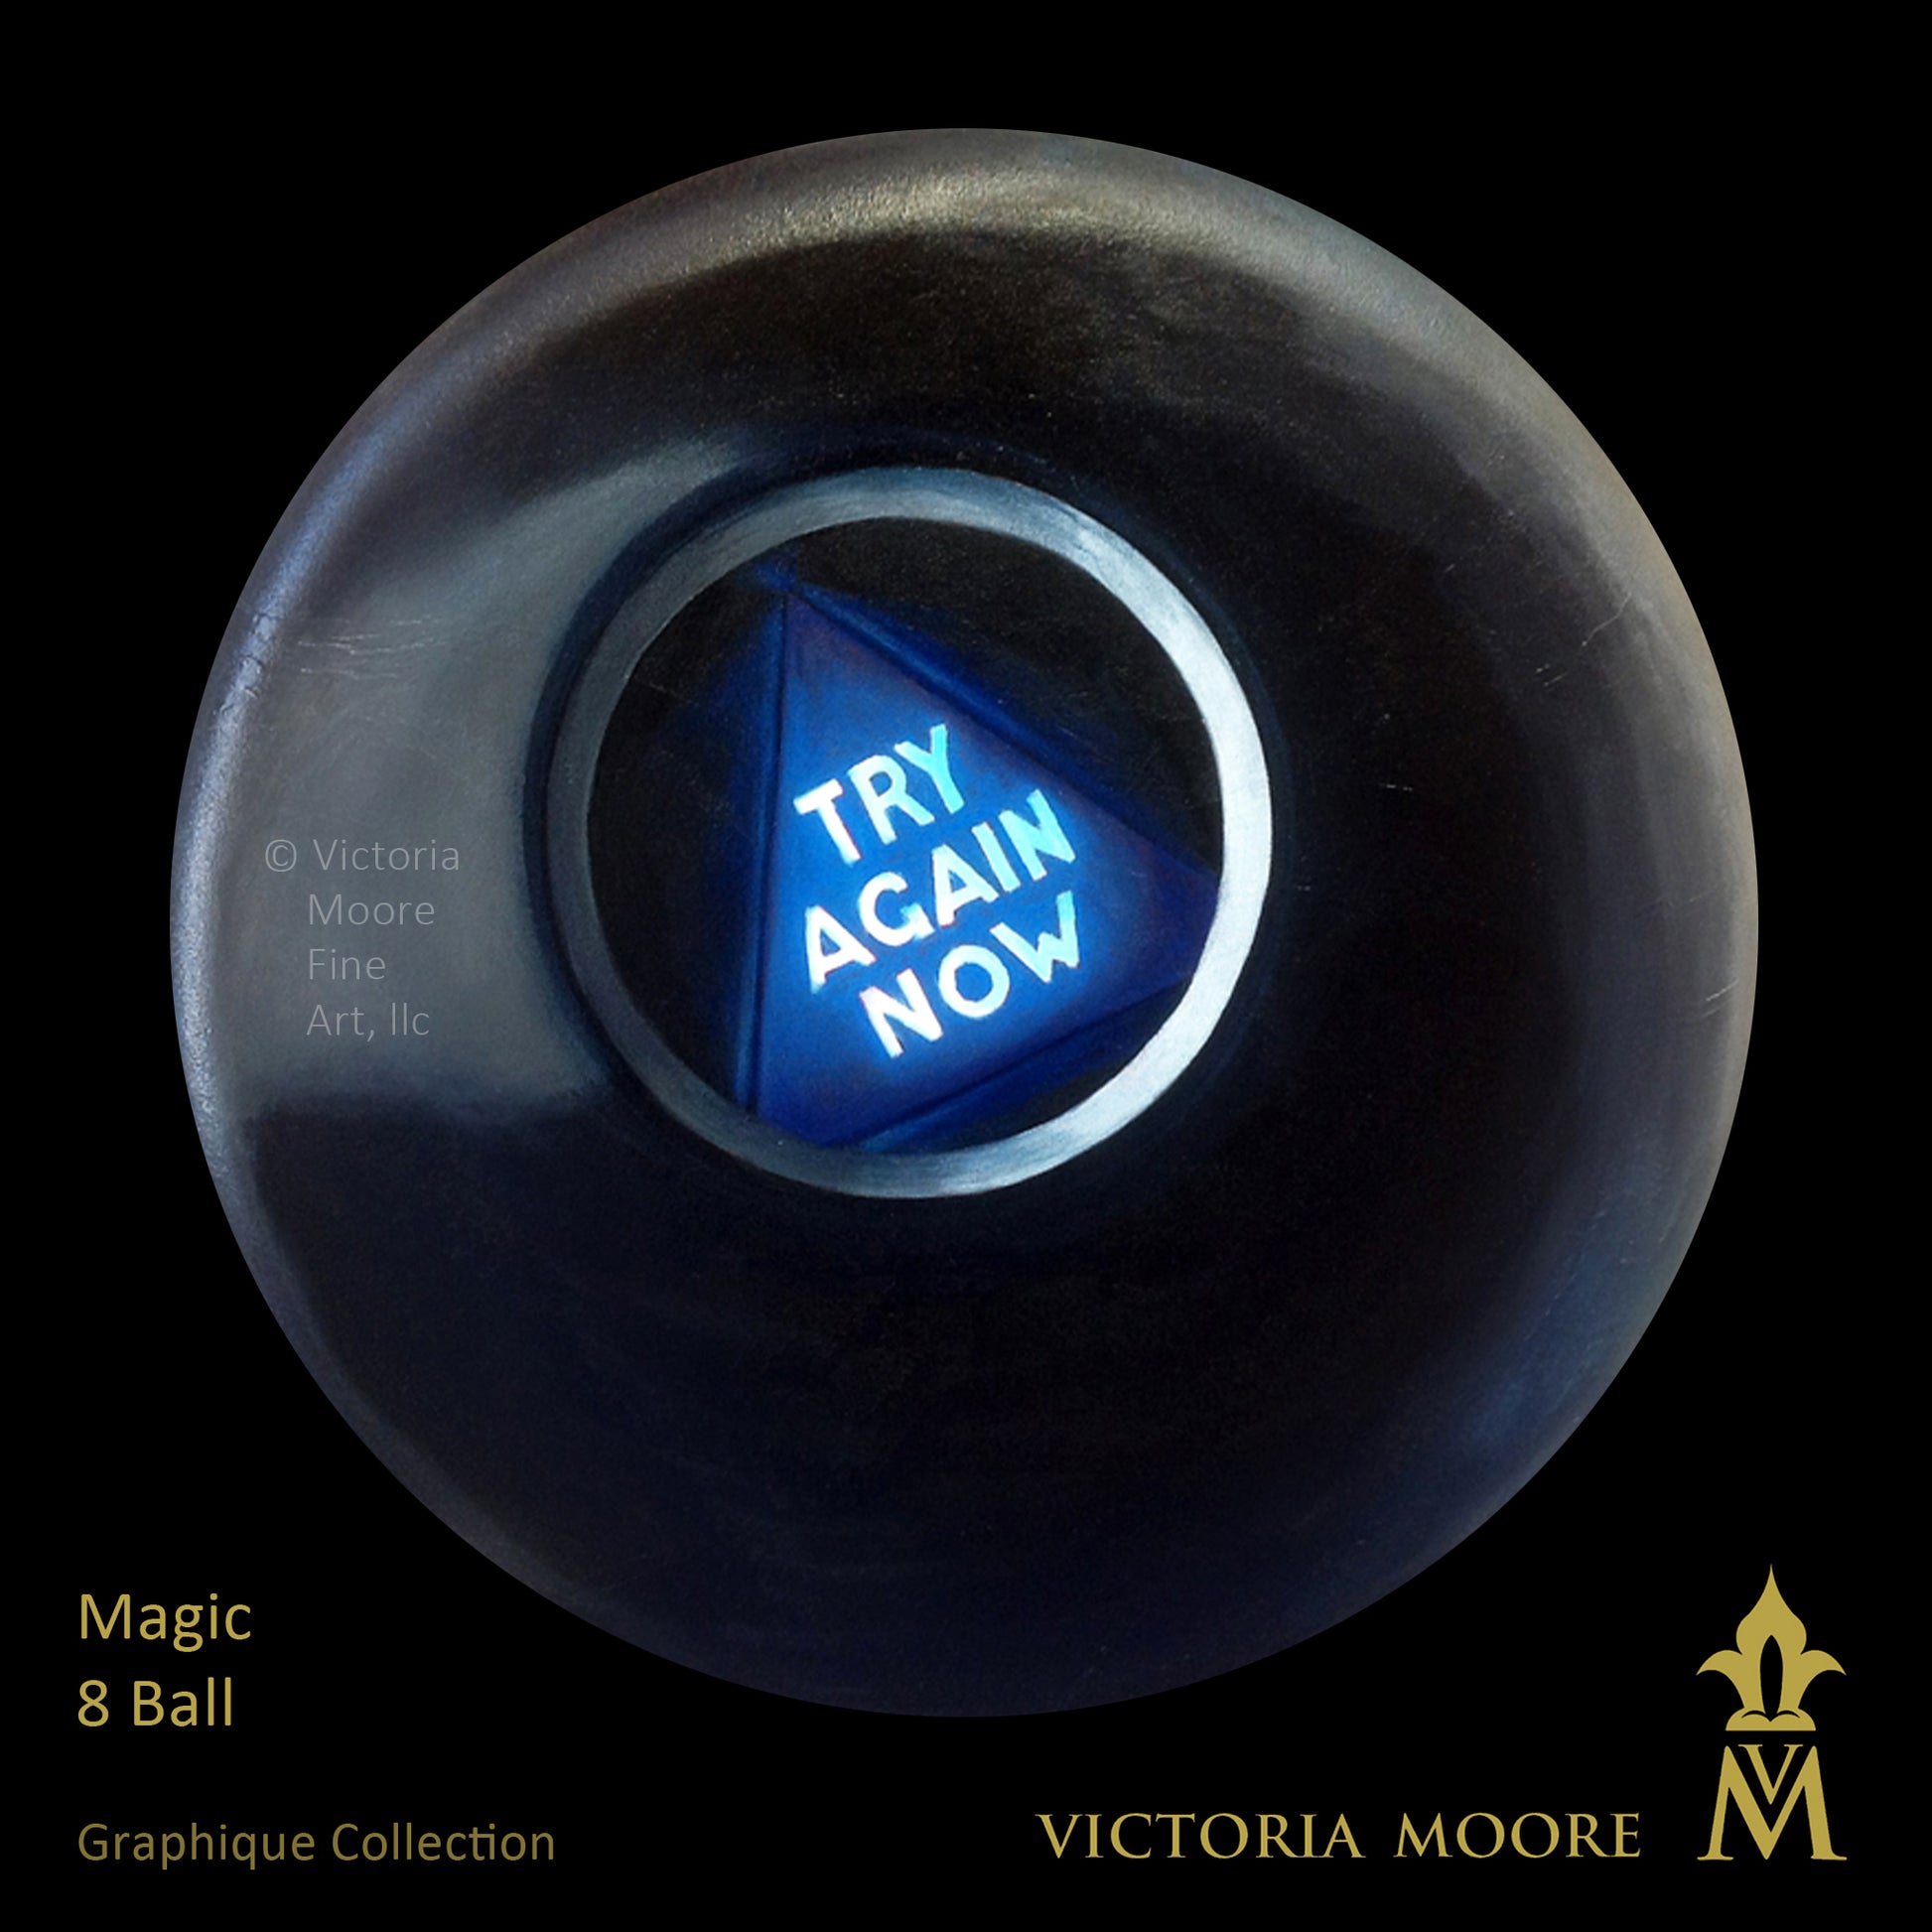 Gigantic Magic 8 Ball Still Won't Tell You What You Want to Hear